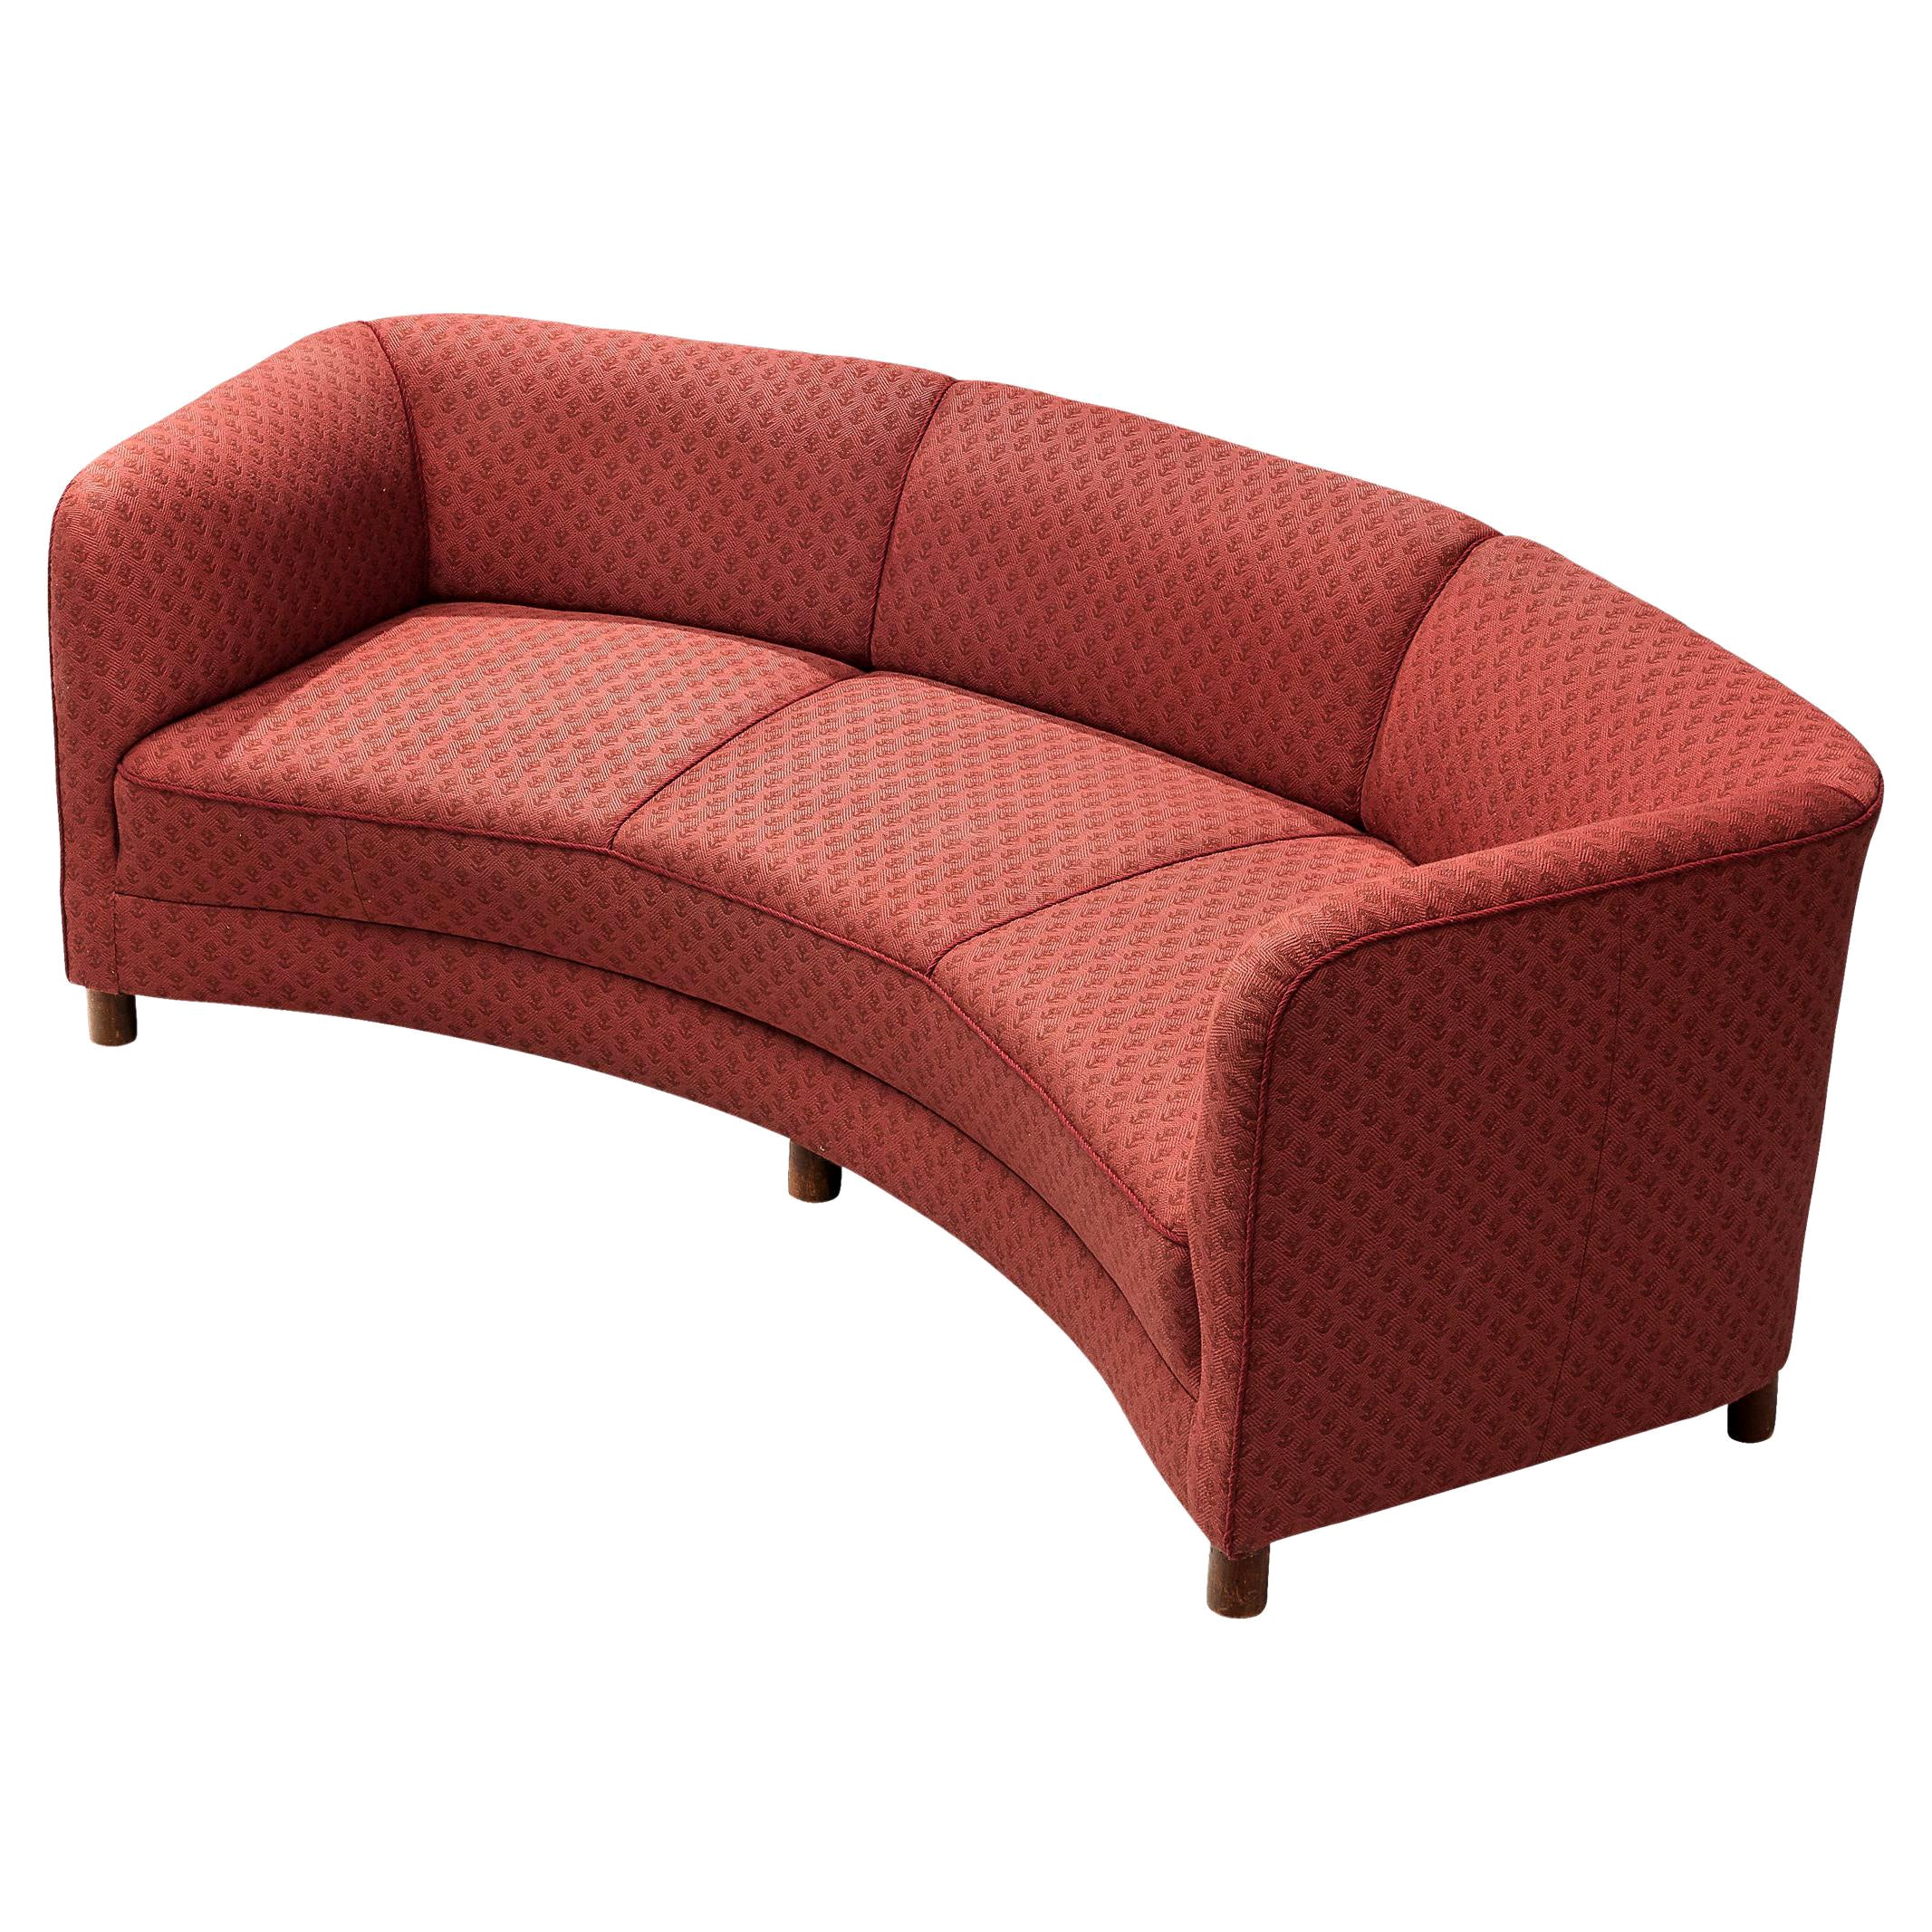 Danish Curved Sofa in Floral Red Upholstery For Sale